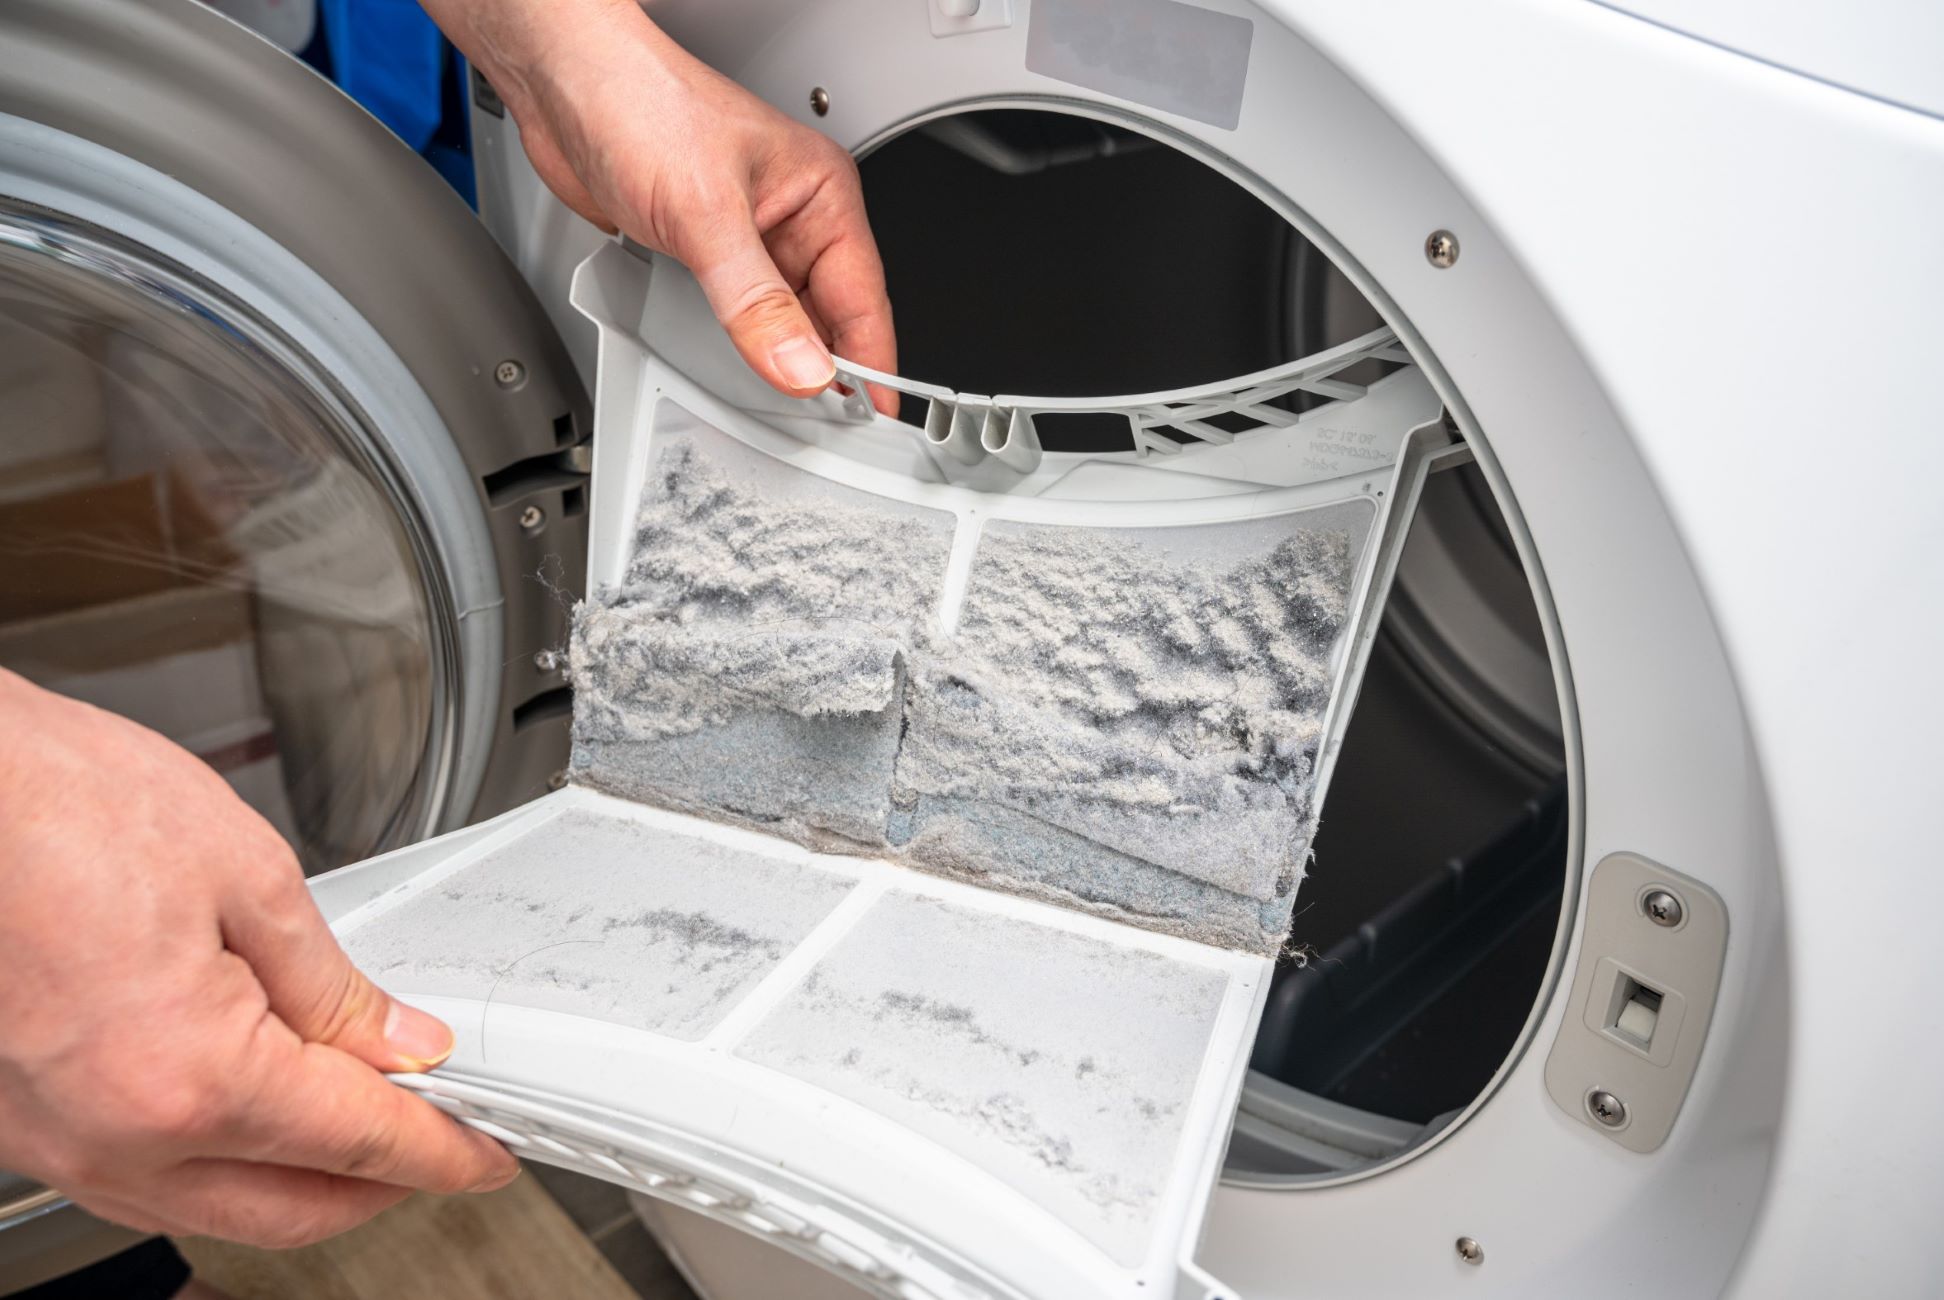 How To Get Rid Of Lint In A Washing Machine